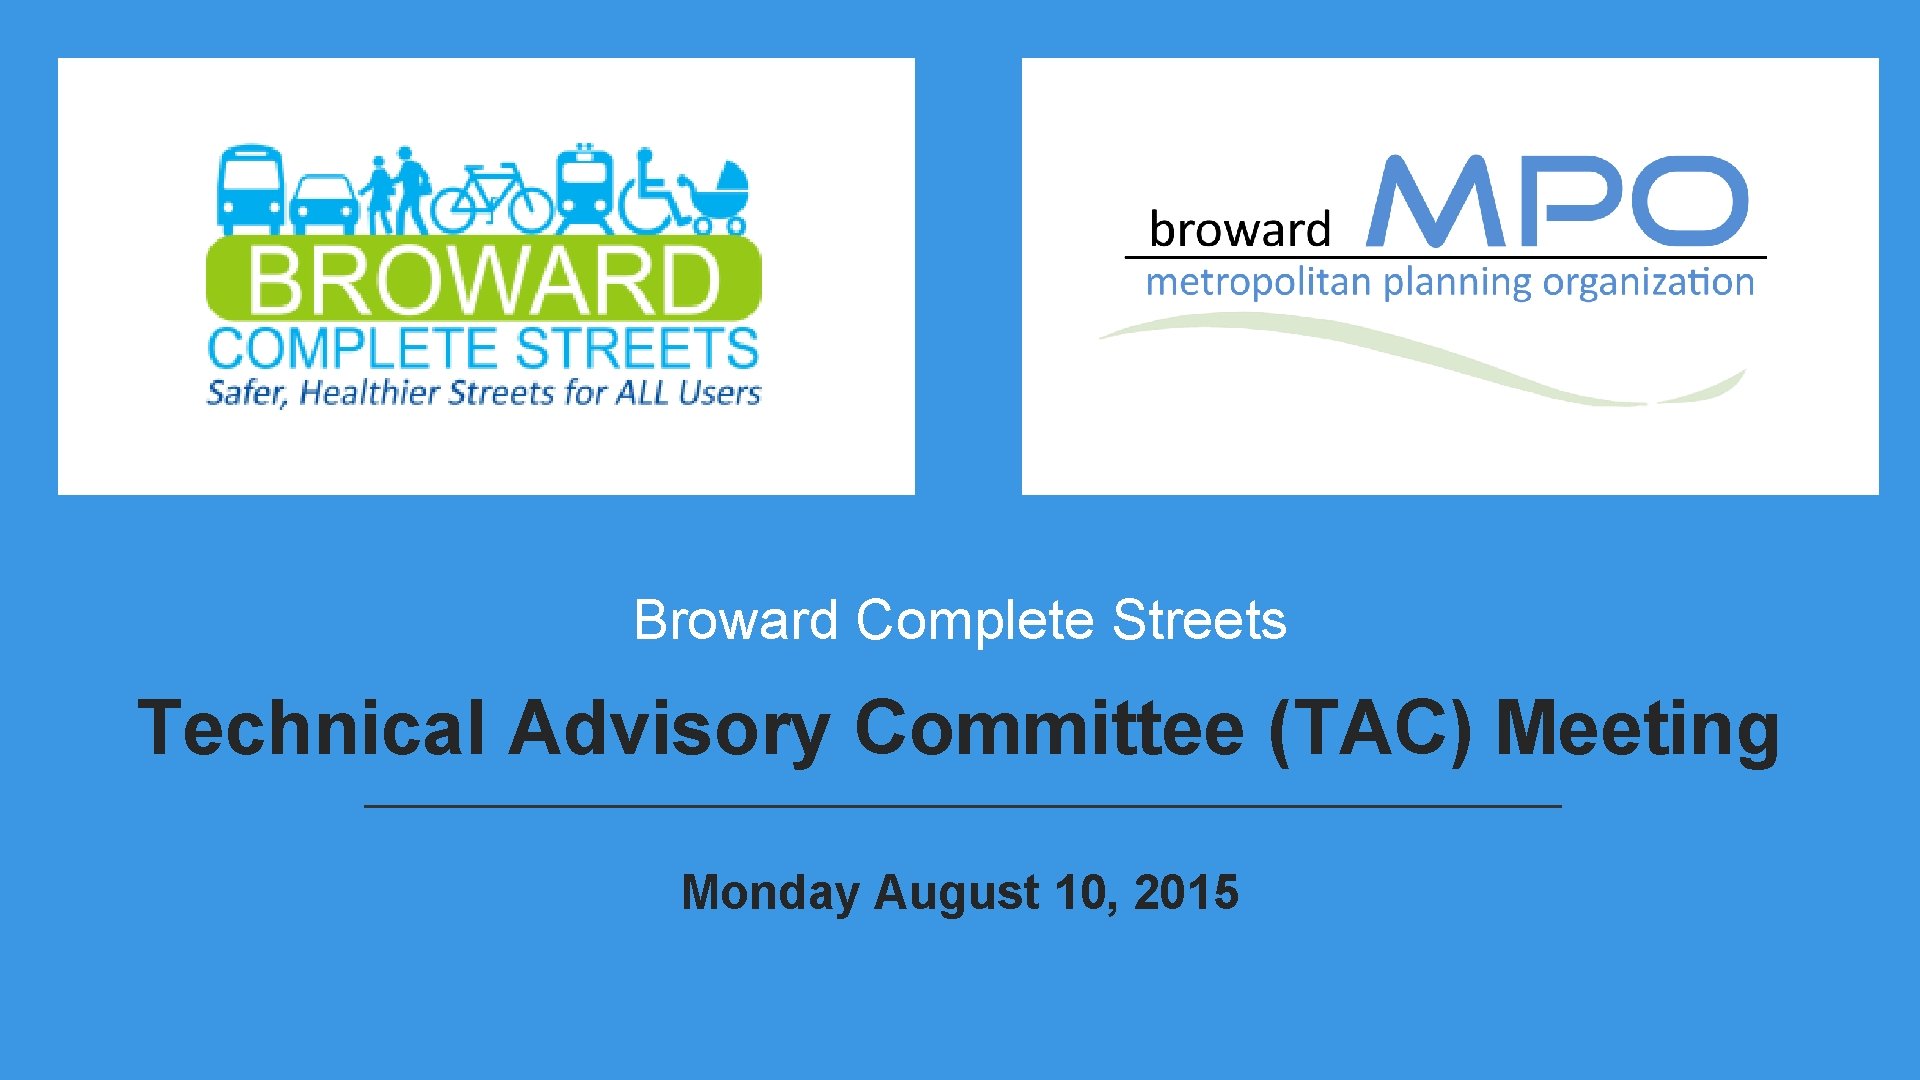 Broward Complete Streets Technical Advisory Committee (TAC) Meeting Monday August 10, 2015 